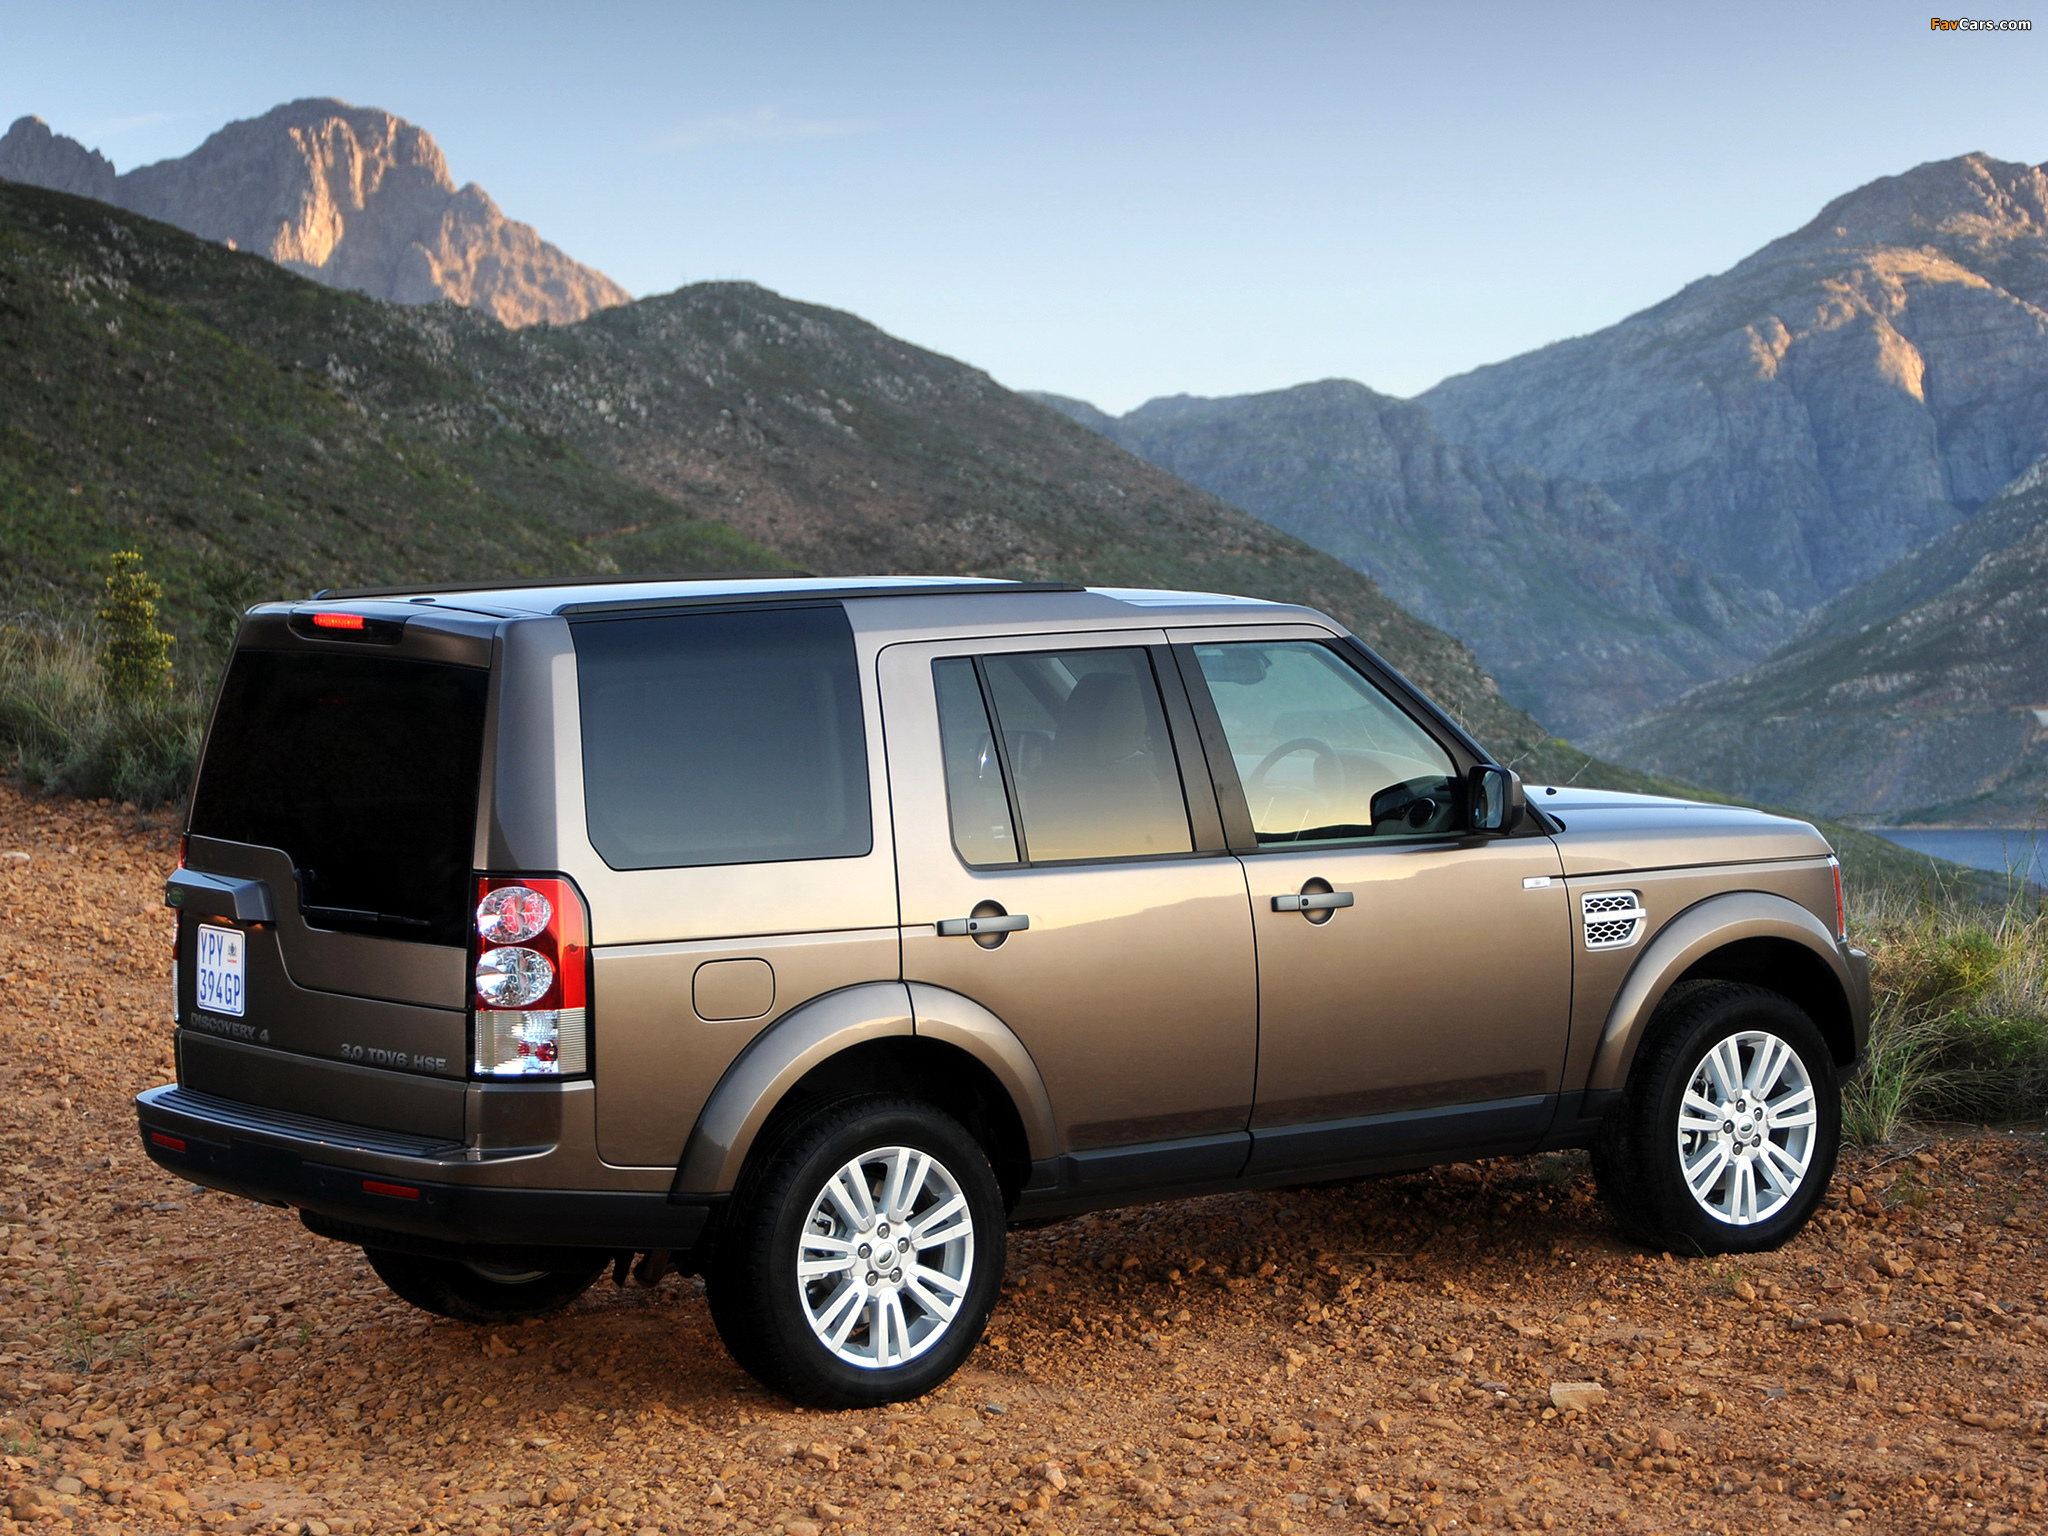 Land Rover Discovery 4 3.0 TDV6 ZA-spec 2009-13 wallpapers (2048x1536)